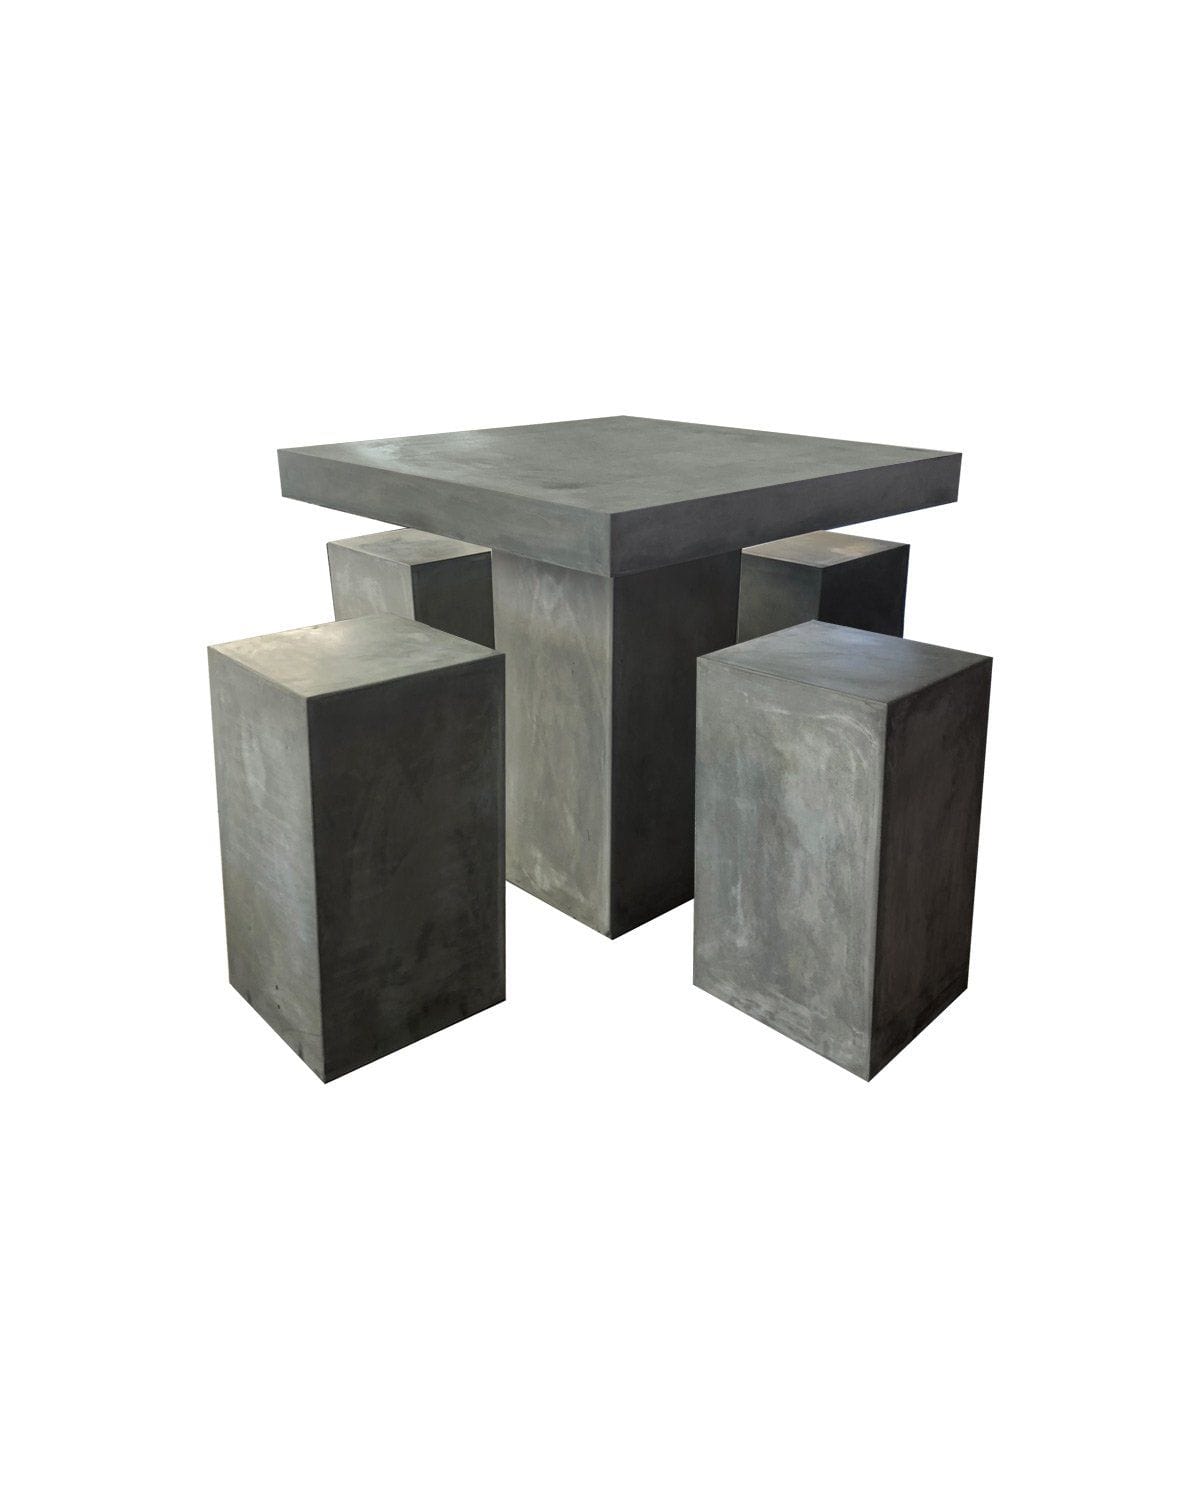 GFRC Gist Piazza Bistro: Concrete Sets- Table with Stools/Bench Gist